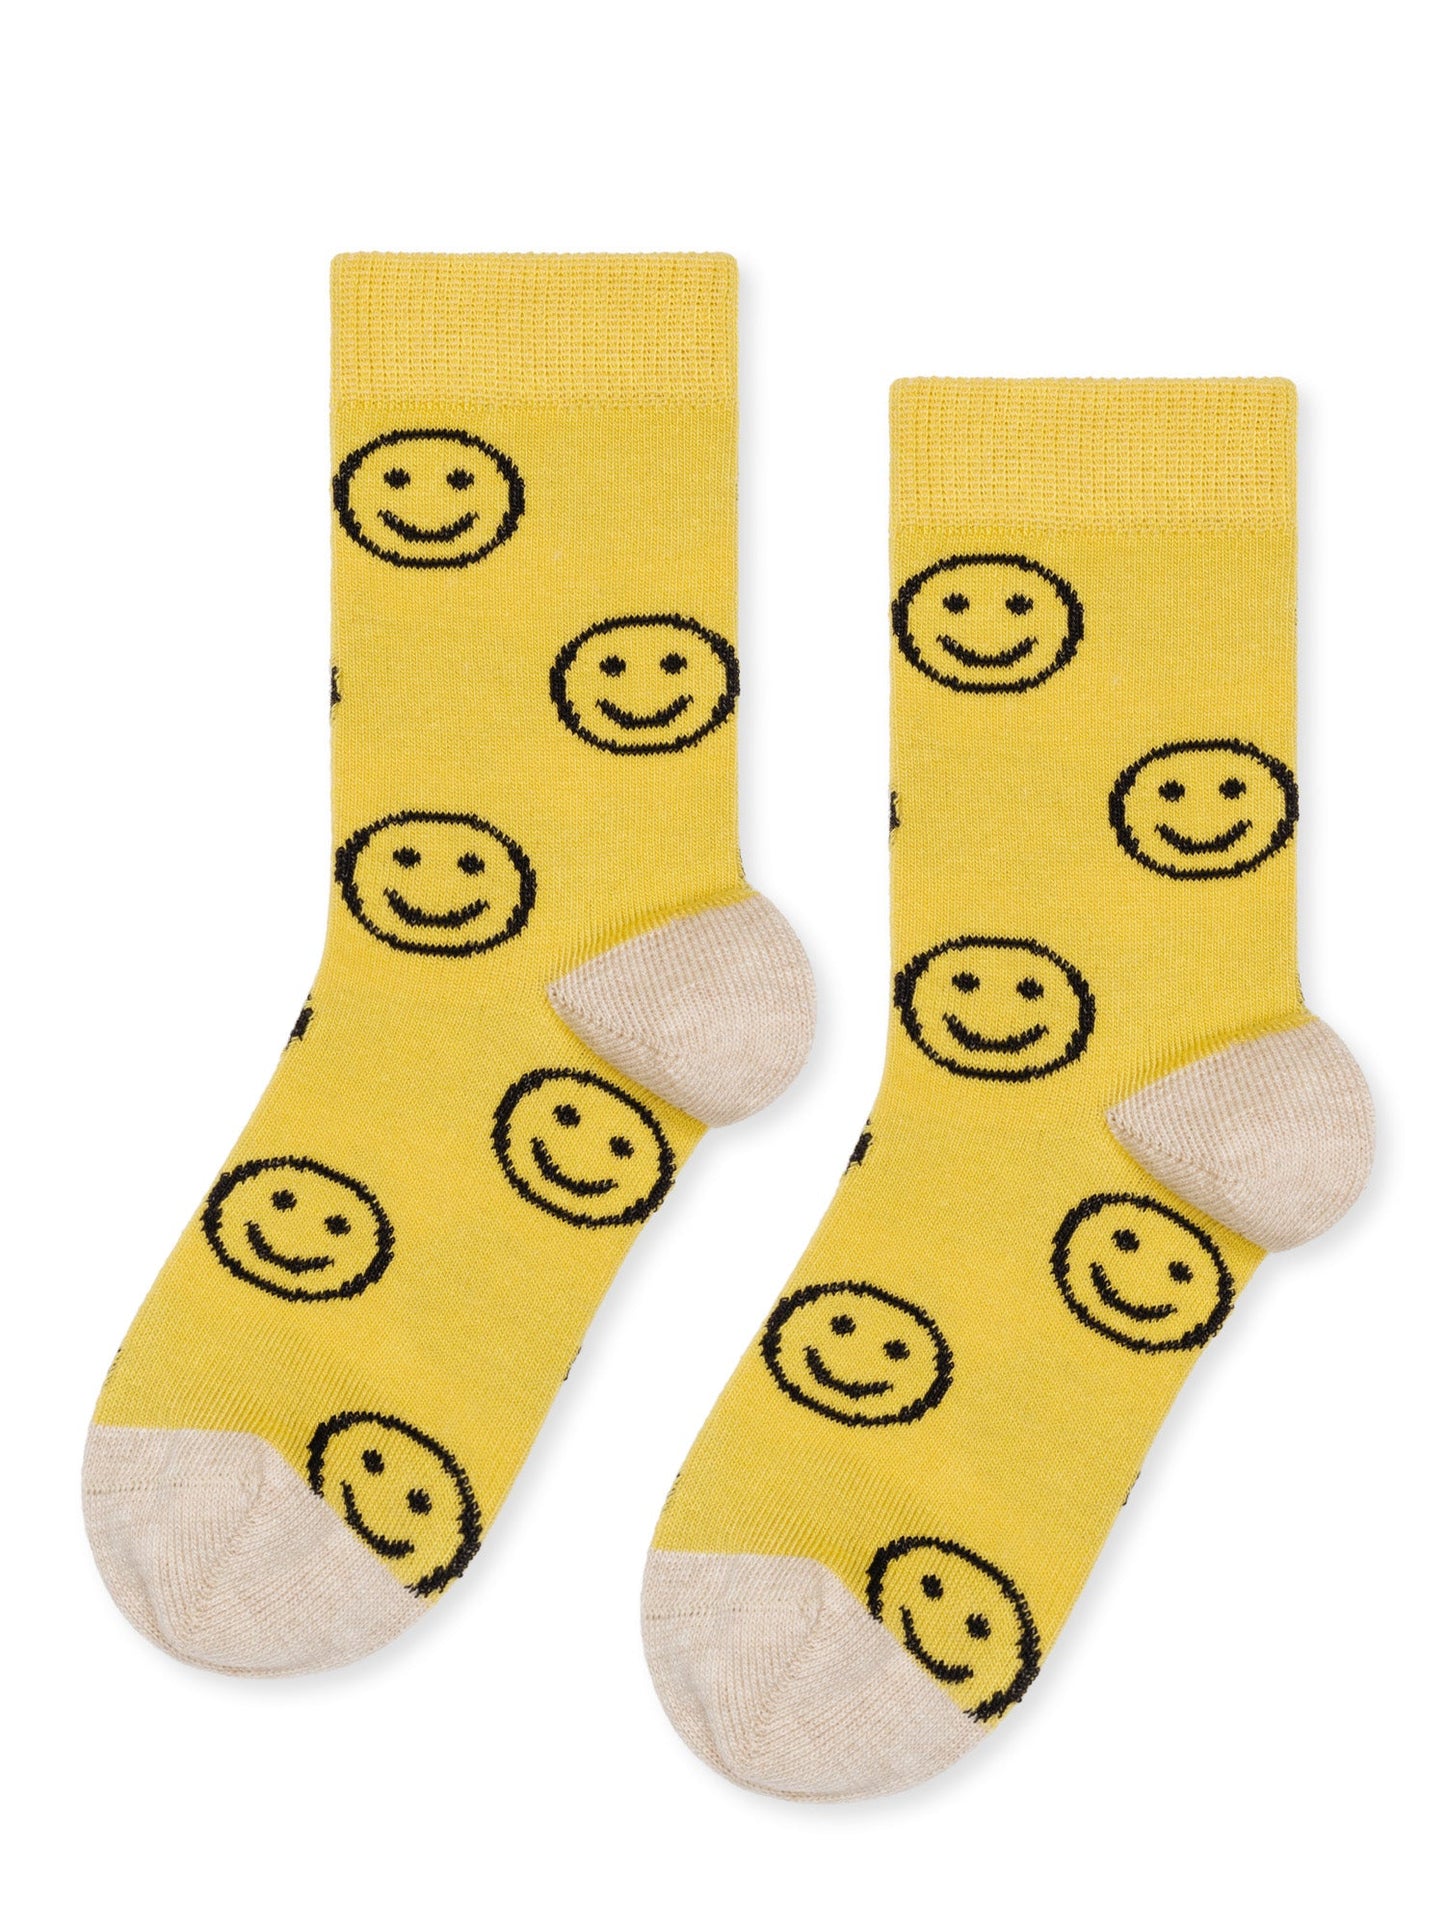 hansel from basel mini emoji kids crew socks / Smile! We just had to make a kid’s version of our favorite women’s design with cute little happy faces. Made in Portugal at a small family-run factory that operates entirely on renewable energy.